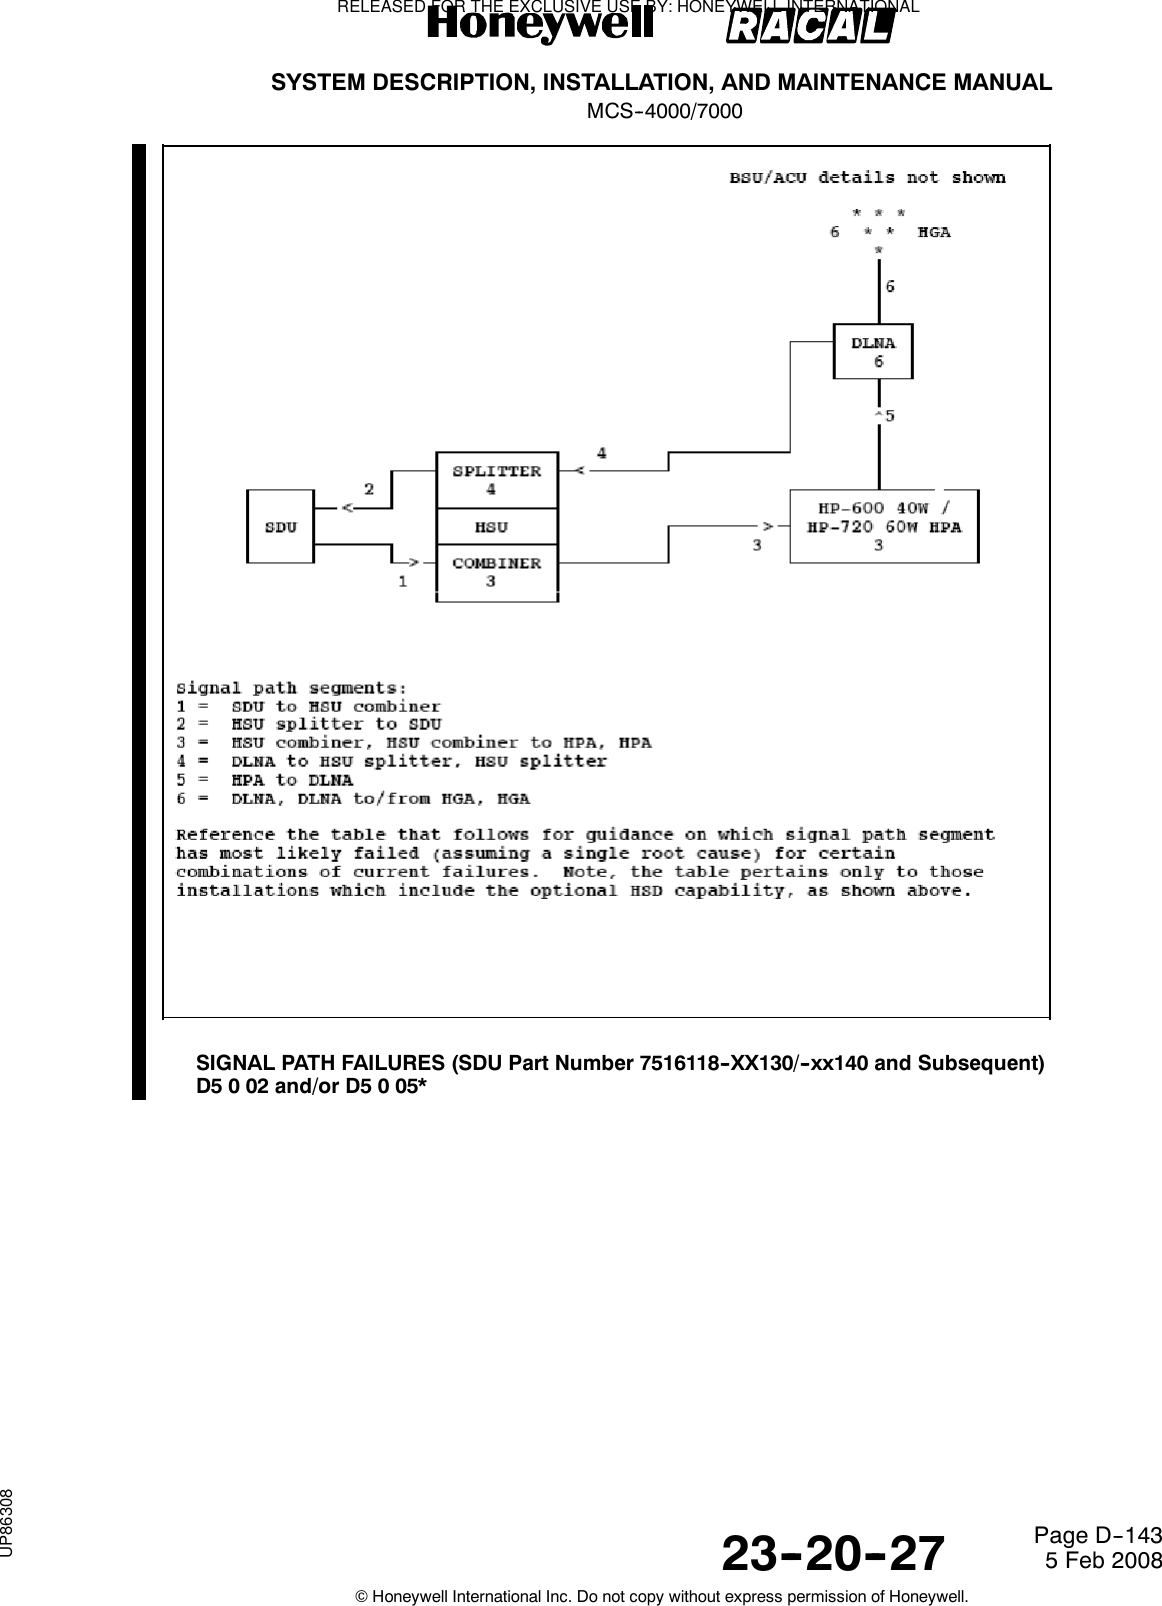 SYSTEM DESCRIPTION, INSTALLATION, AND MAINTENANCE MANUALMCS--4000/700023--20--27 5 Feb 2008©Honeywell International Inc. Do not copy without express permission of Honeywell.Page D--143SIGNAL PATH FAILURES (SDU Part Number 7516118--XX130/--xx140 and Subsequent)D5002and/orD5005*RELEASED FOR THE EXCLUSIVE USE BY: HONEYWELL INTERNATIONALUP86308